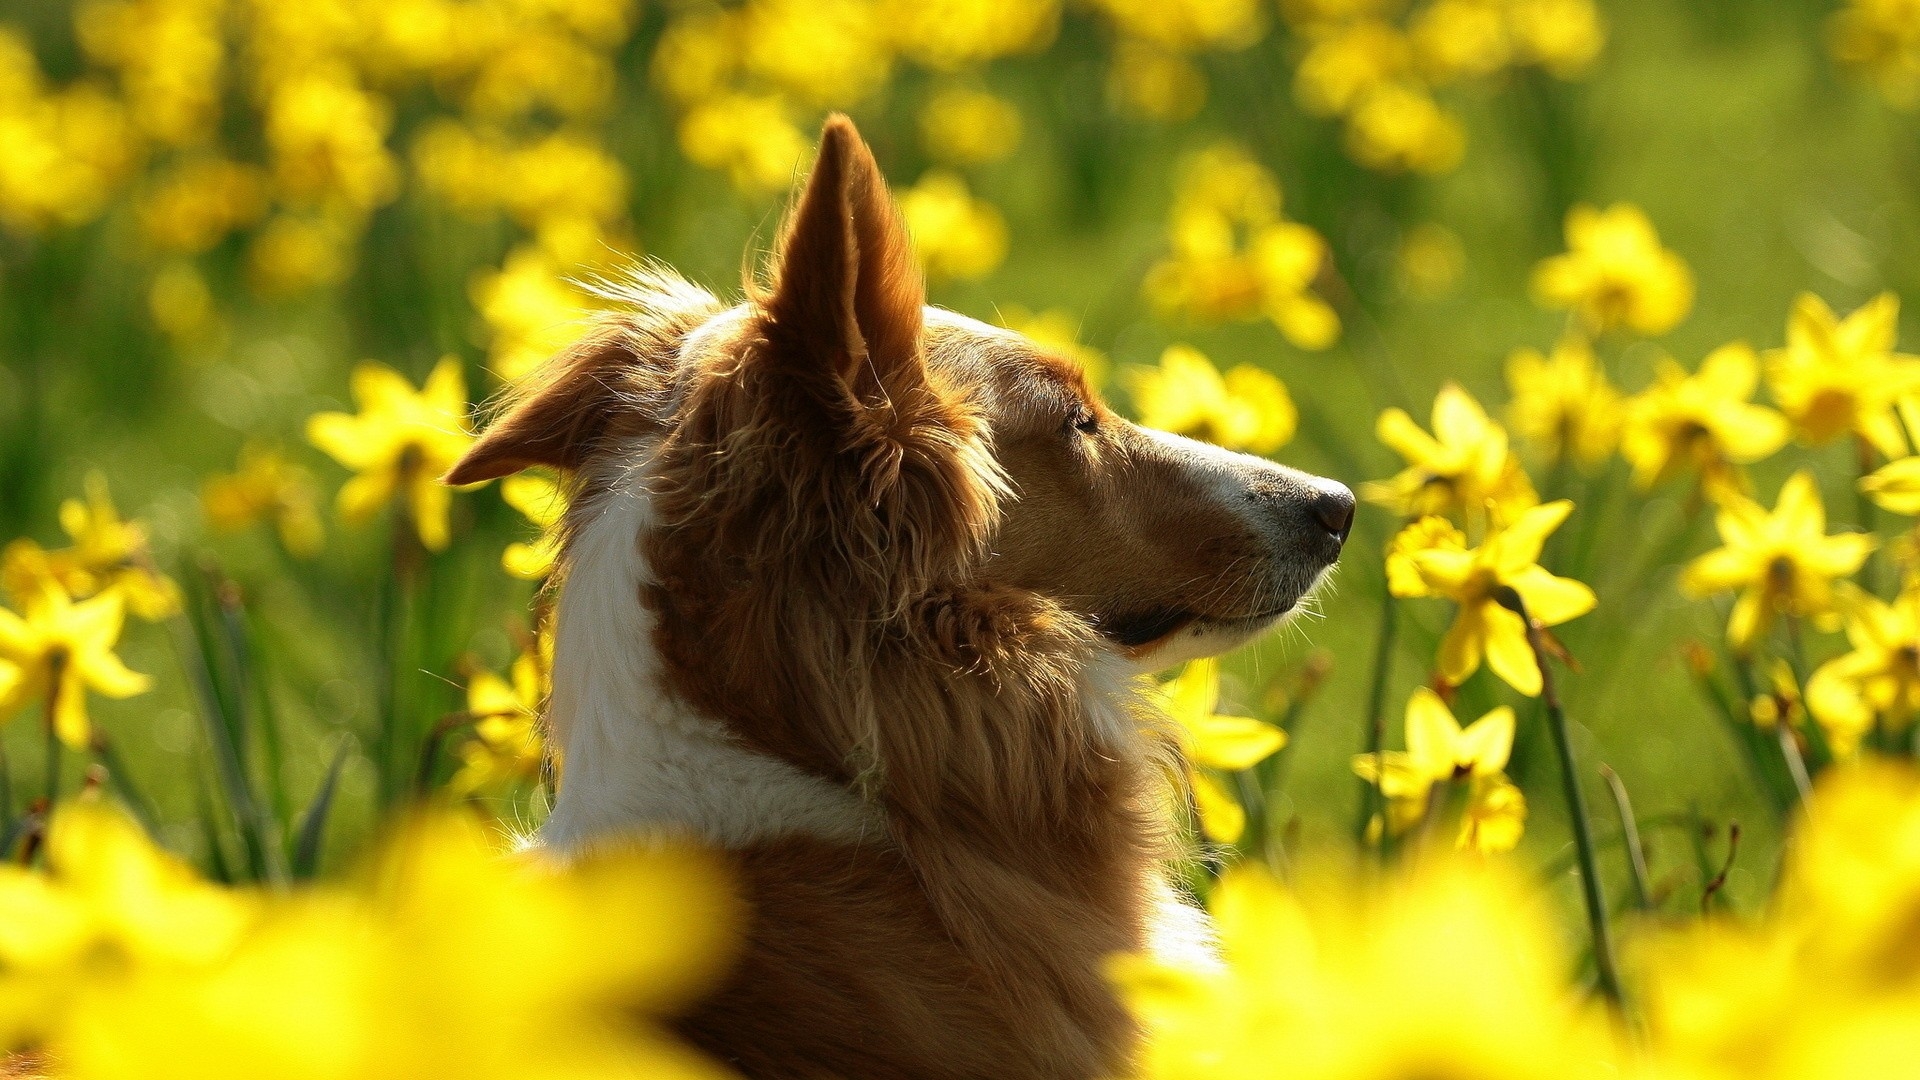 A dog in a field with yellow flowers